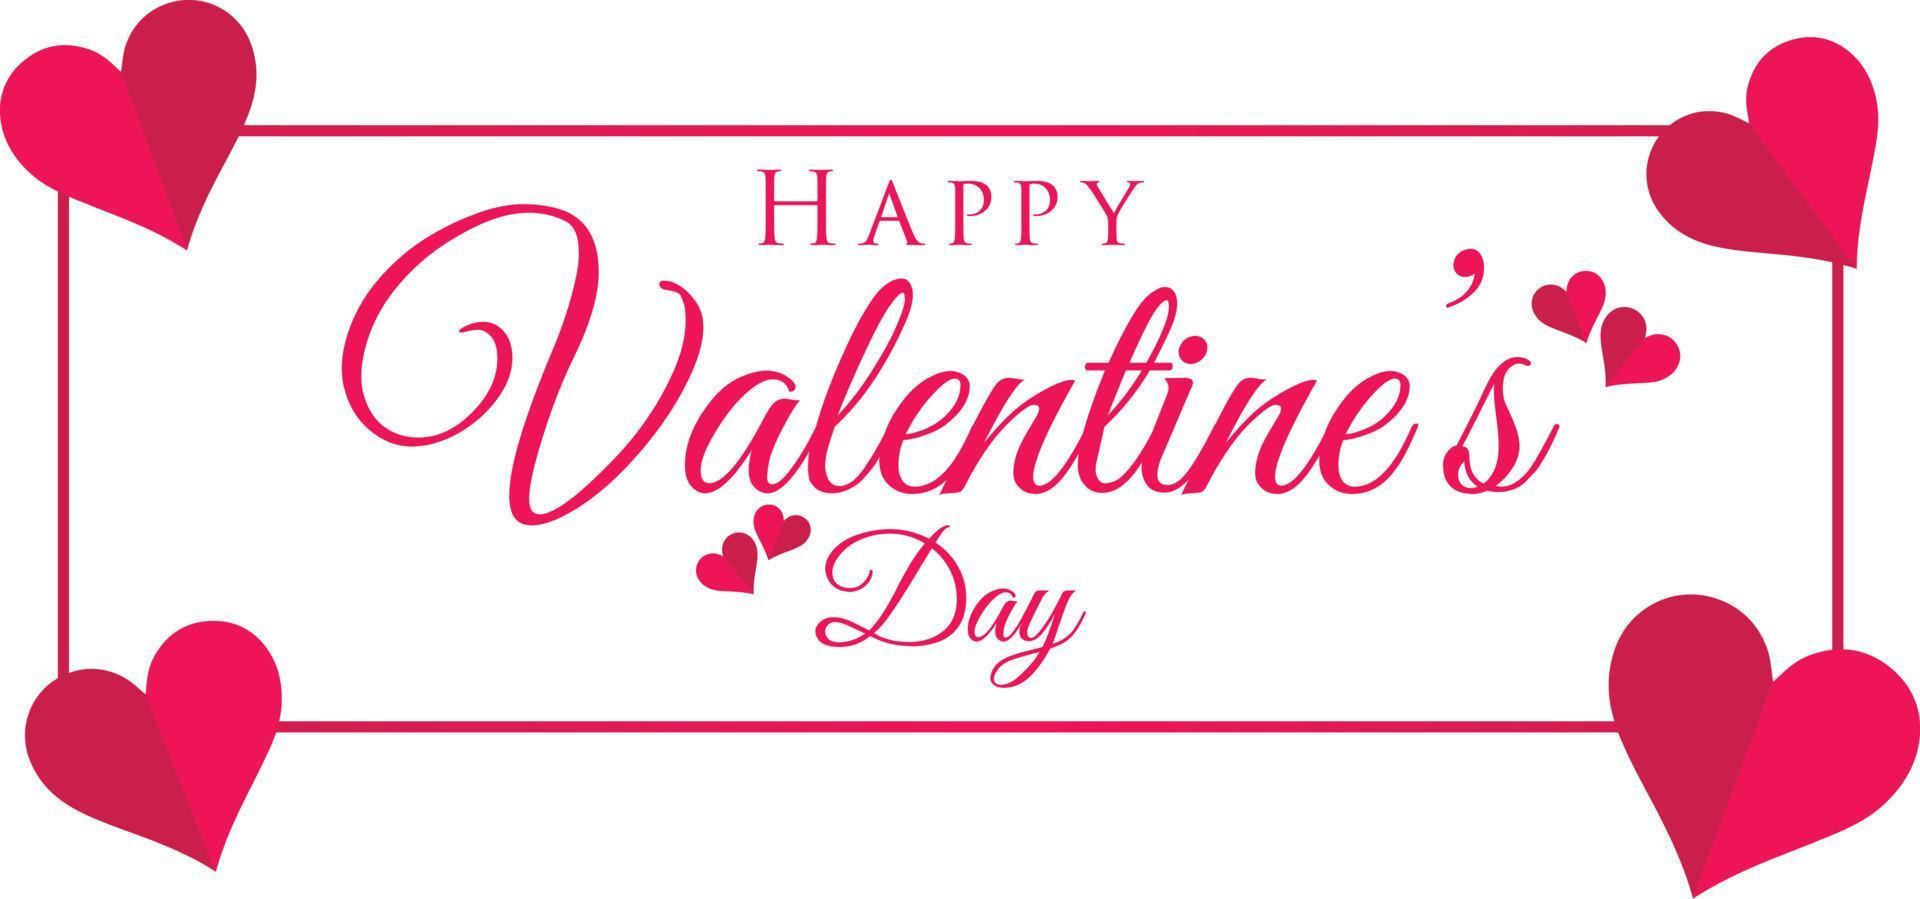 Happy Valentines Day Text with Cutout Paper Heart Shapes. vector